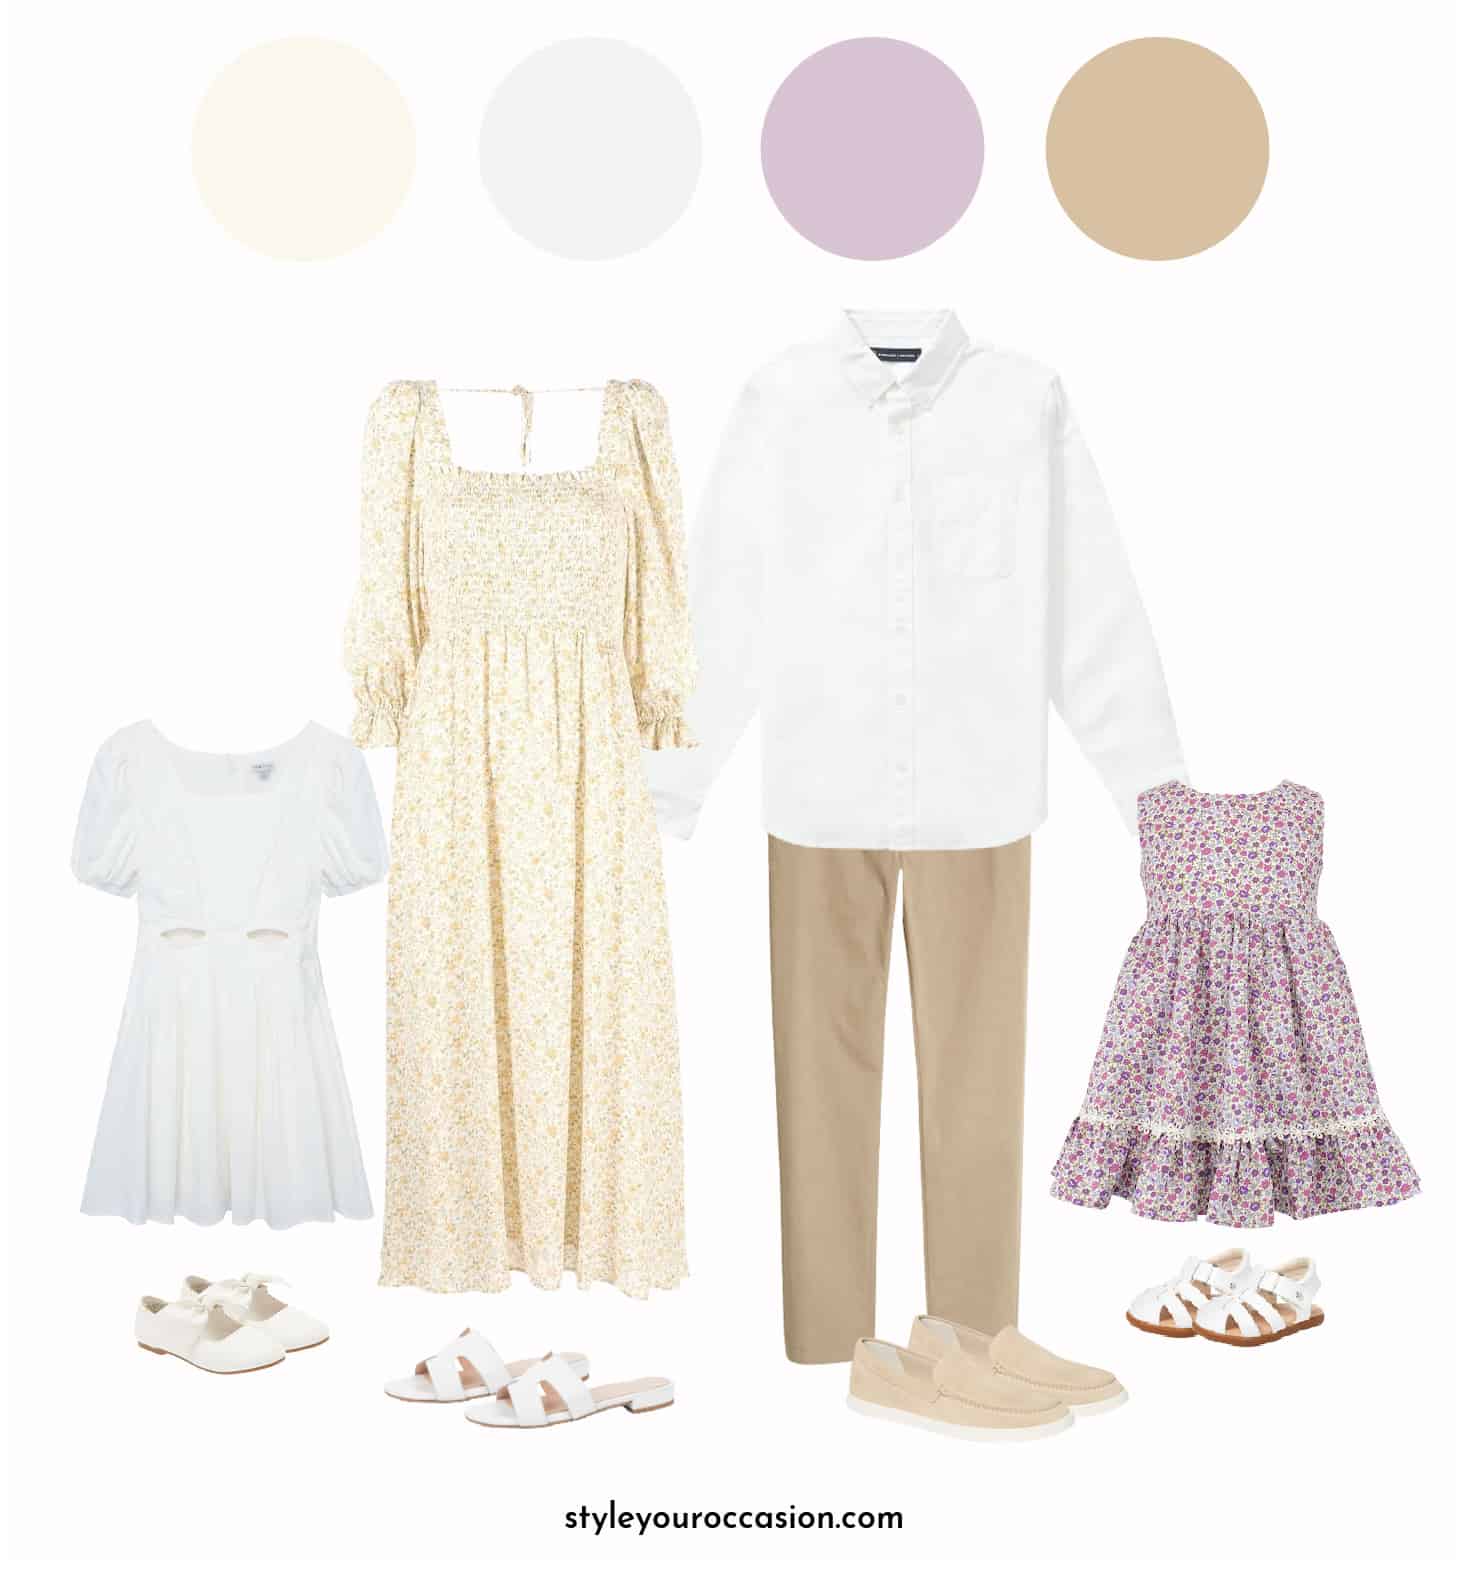 mood board of a family photo outfit guide with yellow, purple, and whites with floral patterns